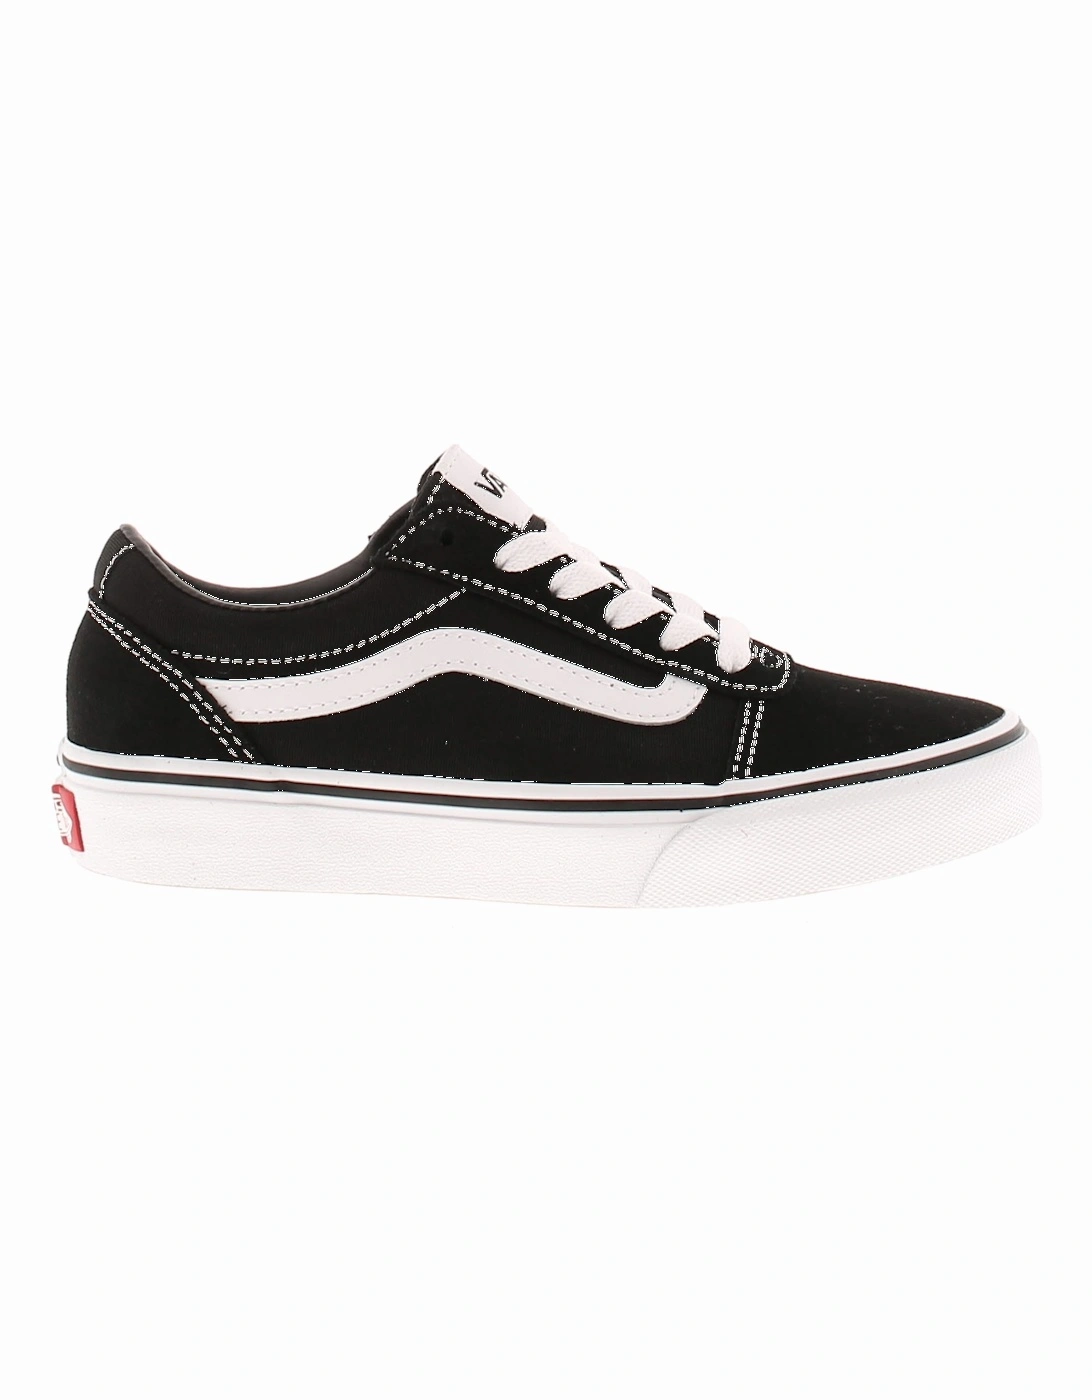 Childrens Trainers YT Ward Lace Up black UK Size